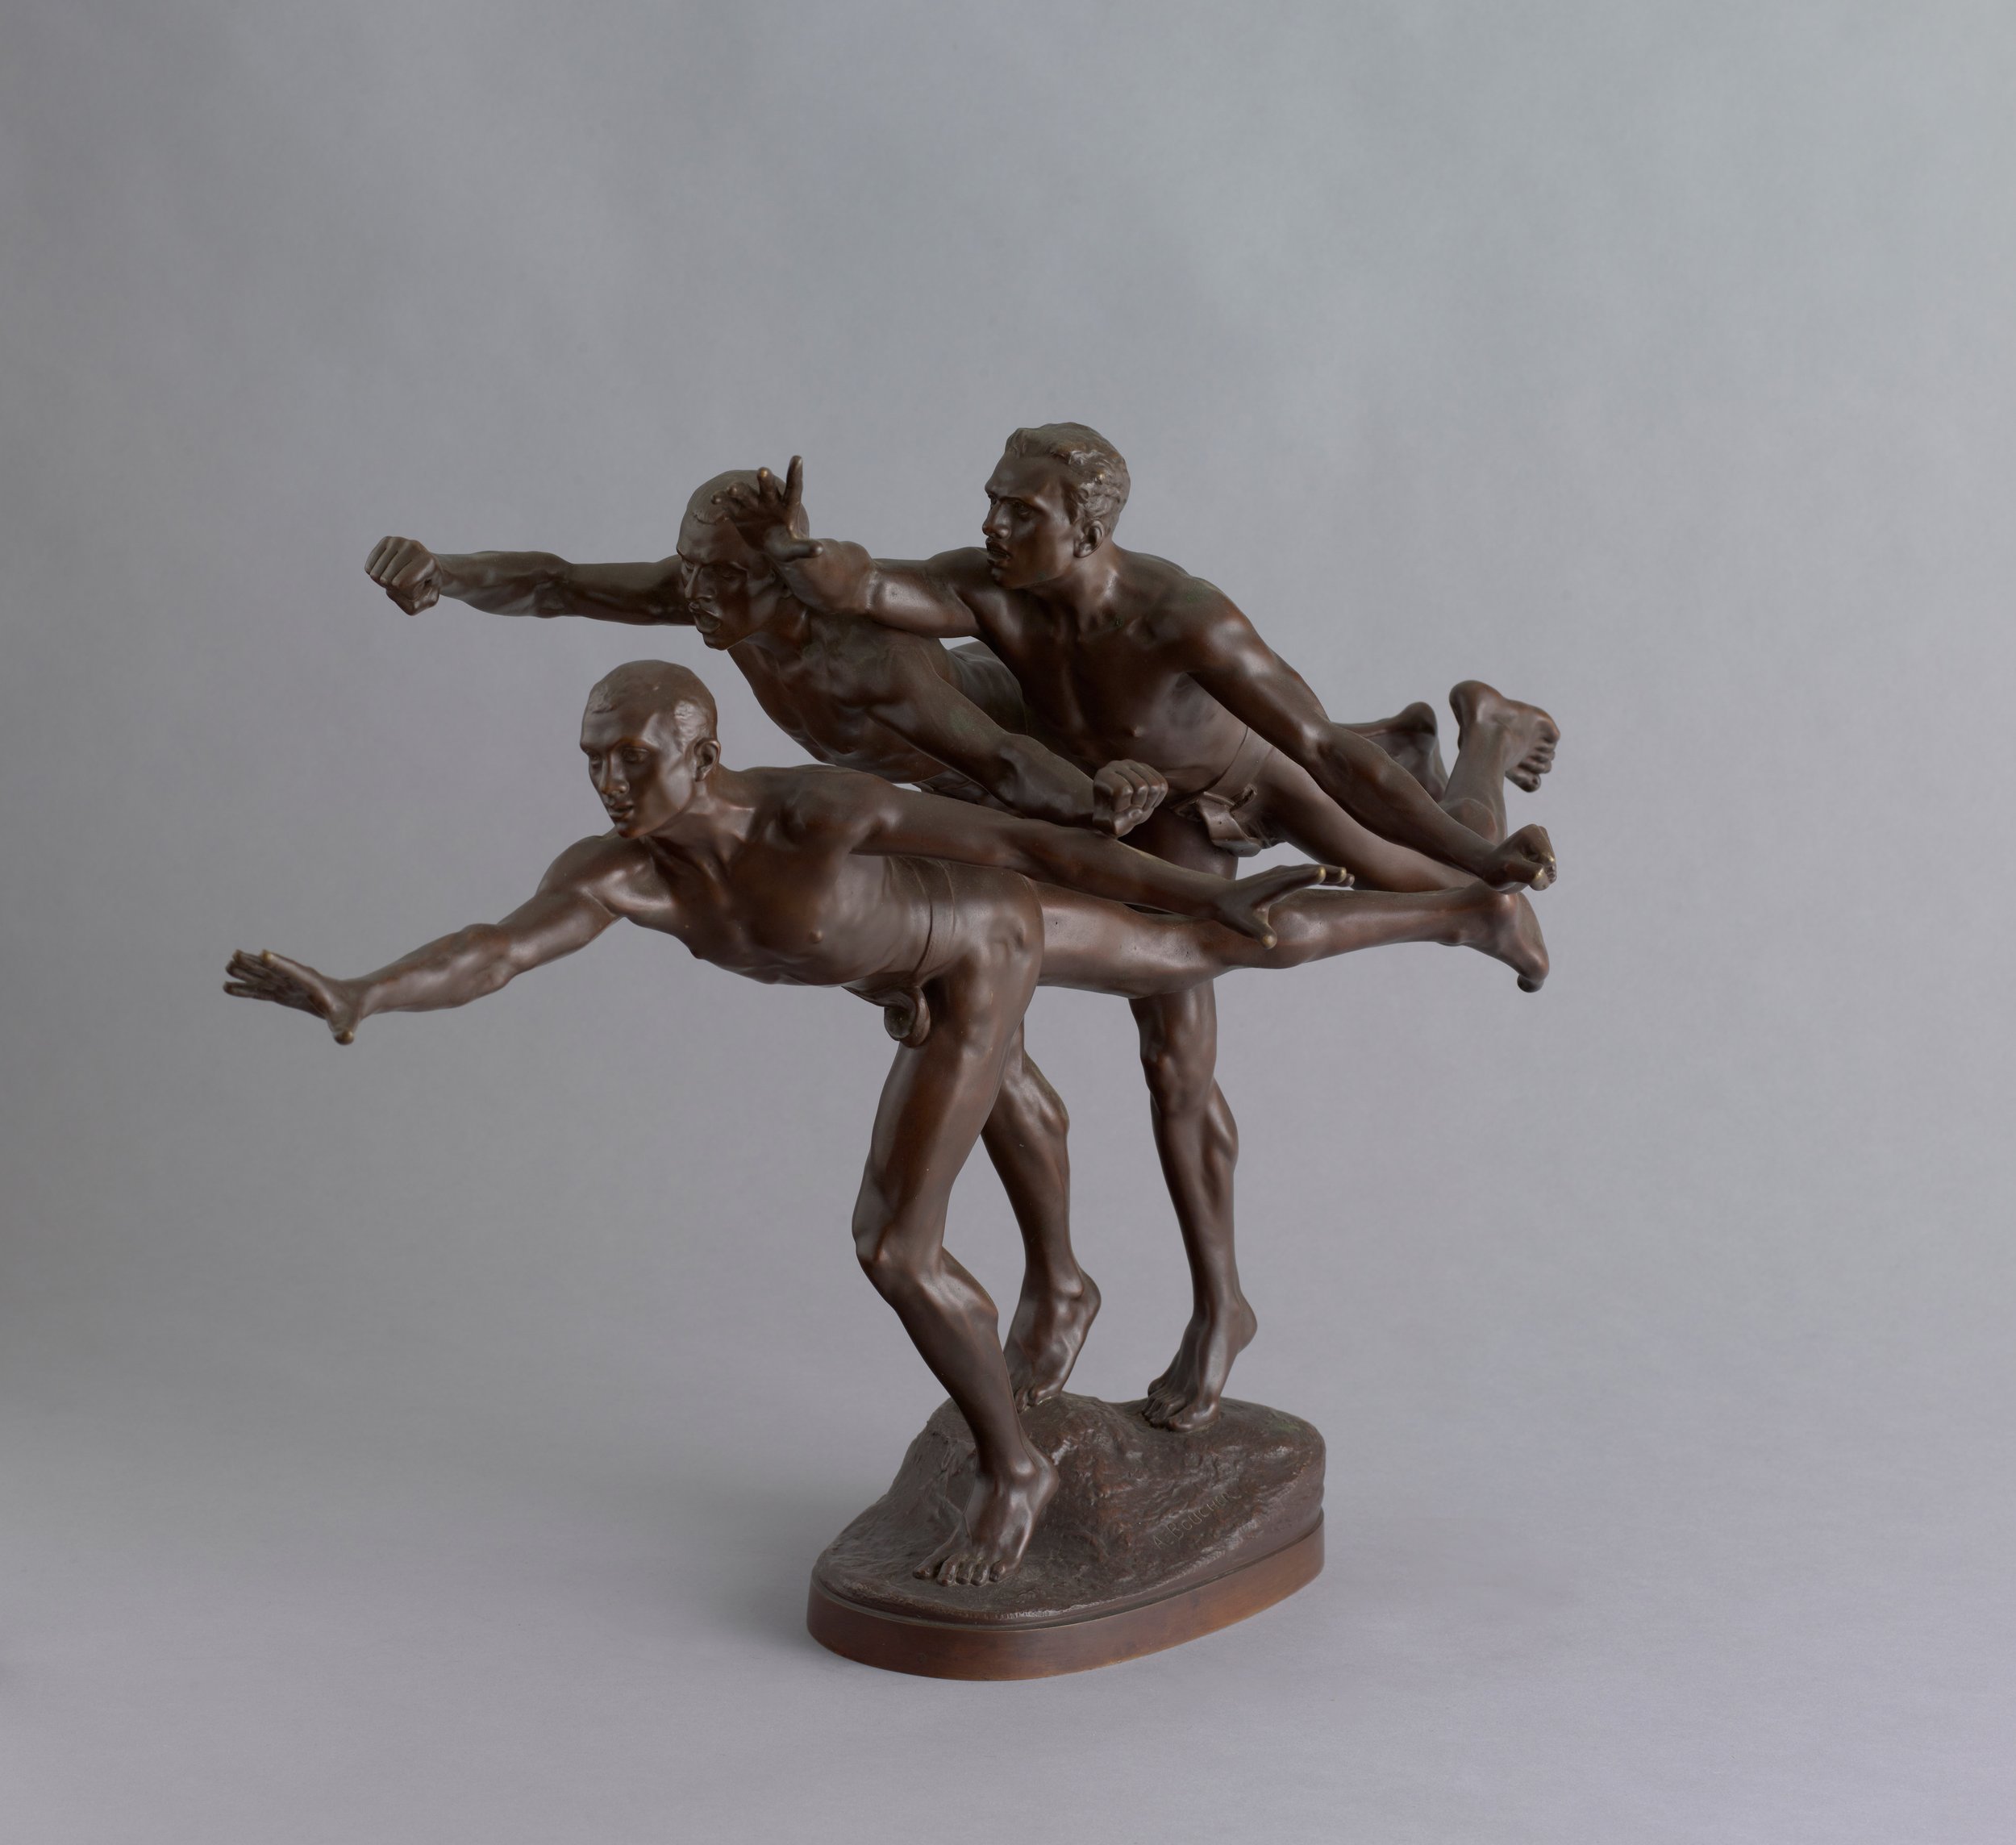   Alfred Boucher  France, 1850–1934  Au But (The Finishing Line) , circa 1890  bronze, 18 x 26 3/4 x 15 inches Bequest of Eleanor G. Potter, 2021.6.10 